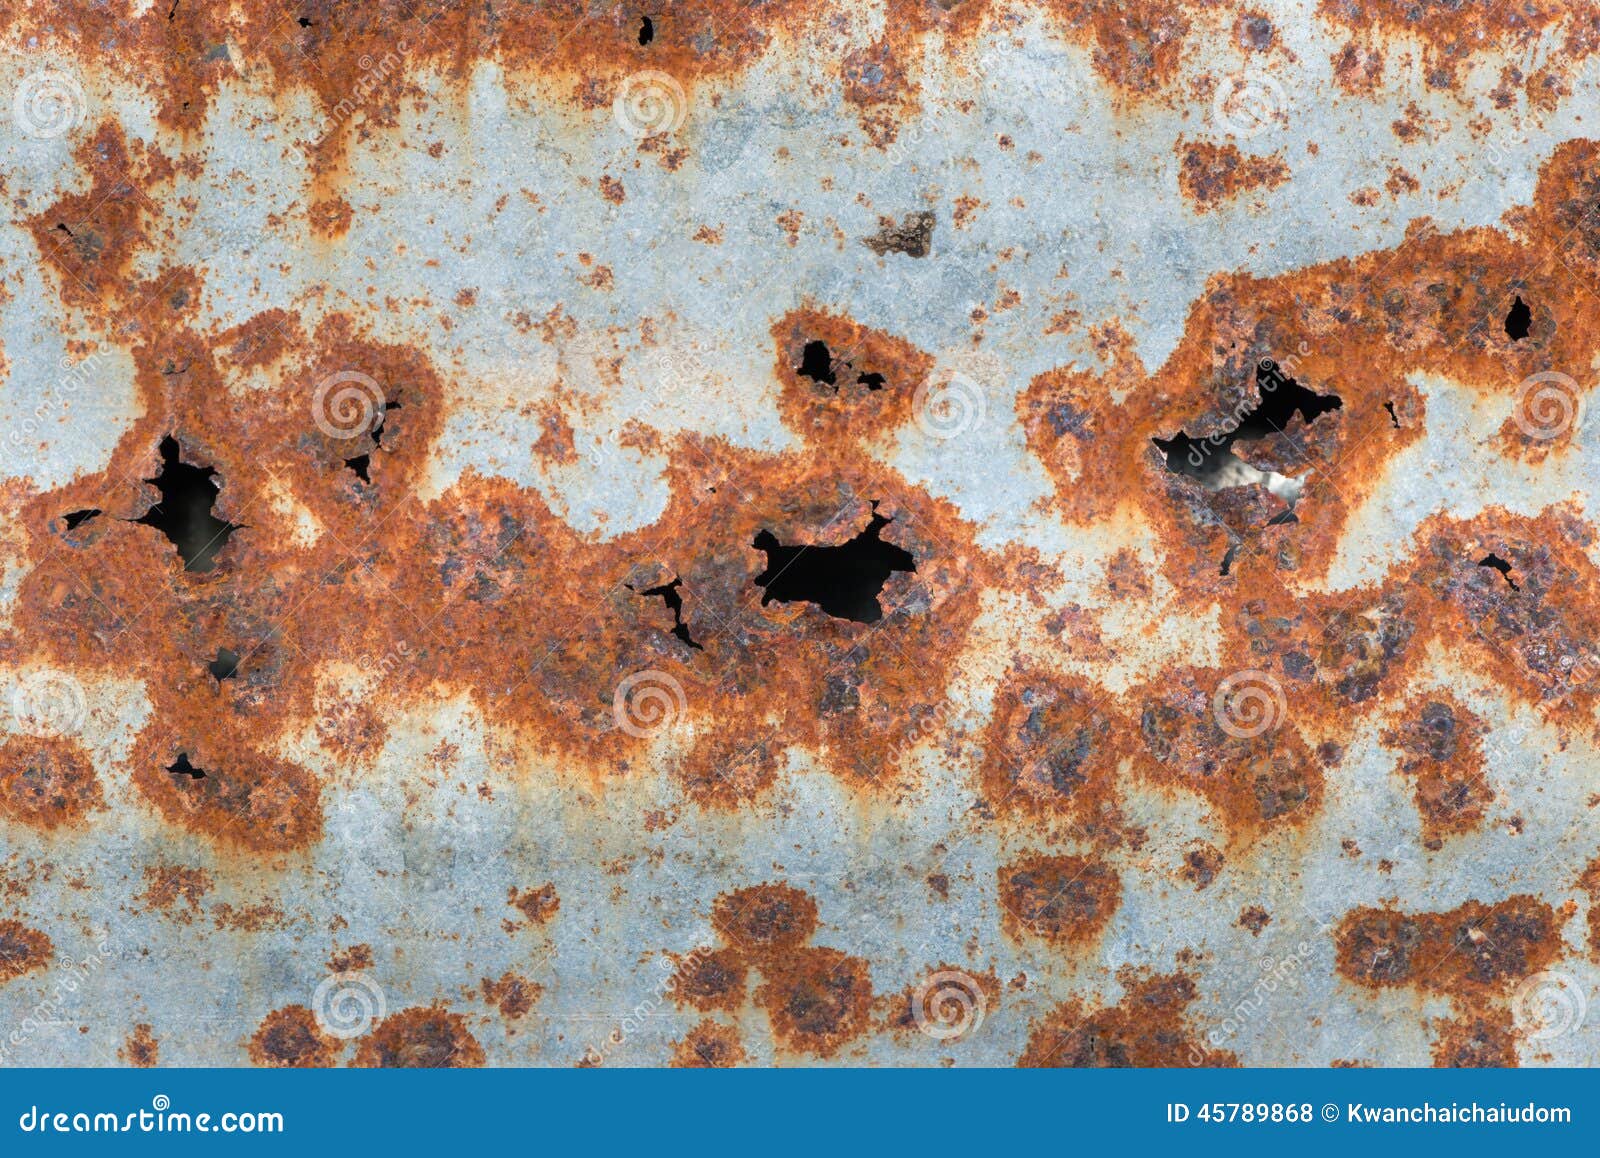 Image library rust фото 15